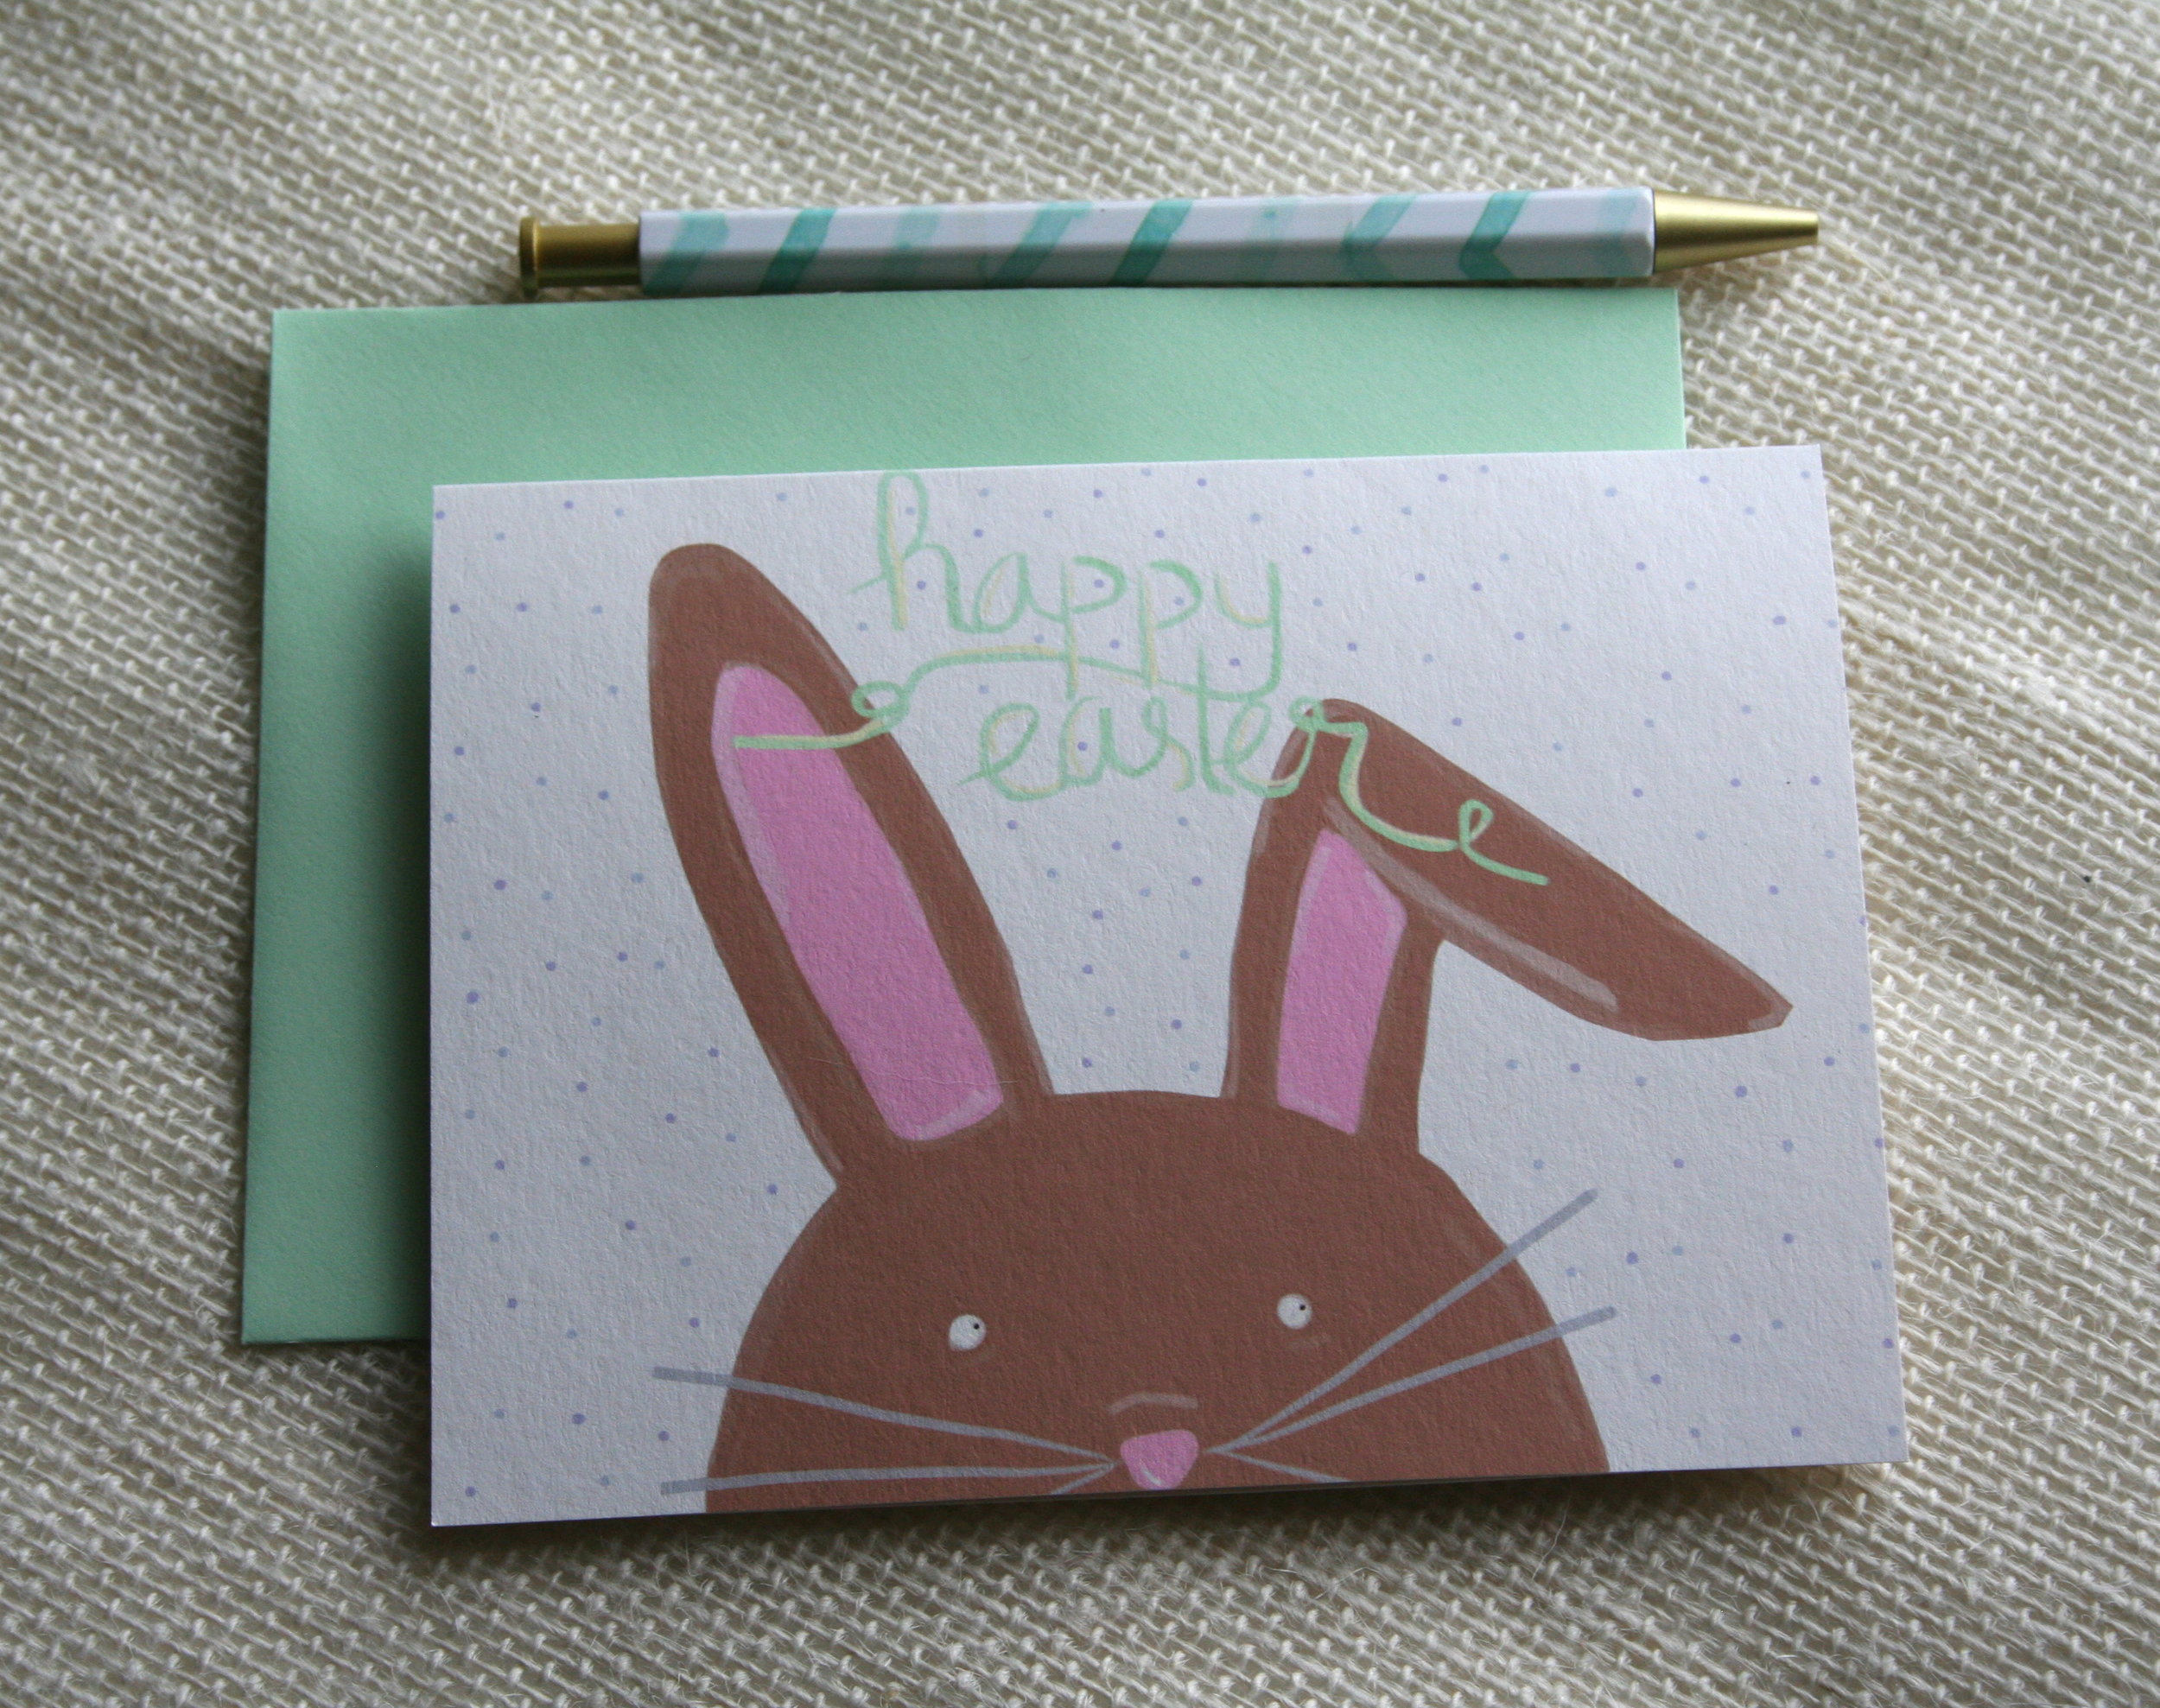 Happy Easter Bunny Greeting Card